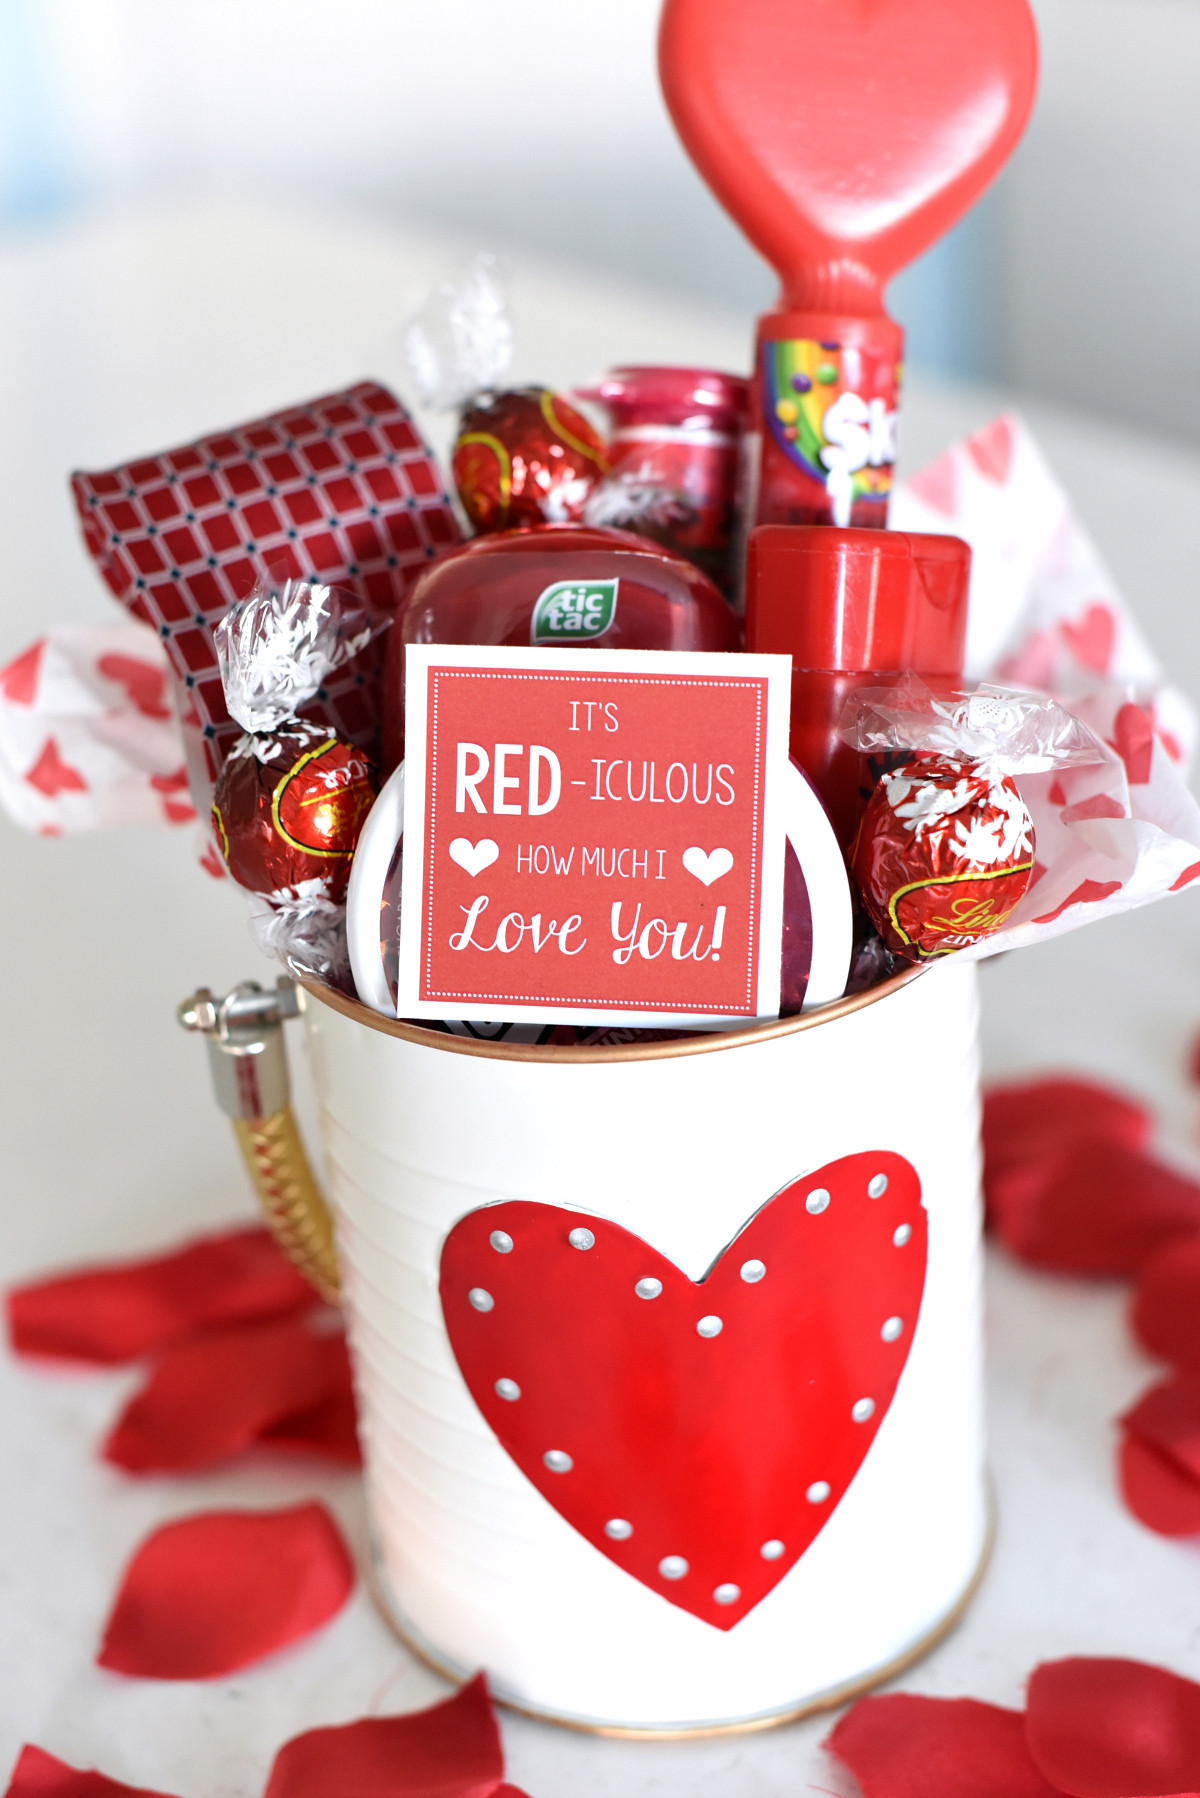 Gift Ideas For Valentines Day
 Cute Valentine s Day Gift Idea RED iculous Basket